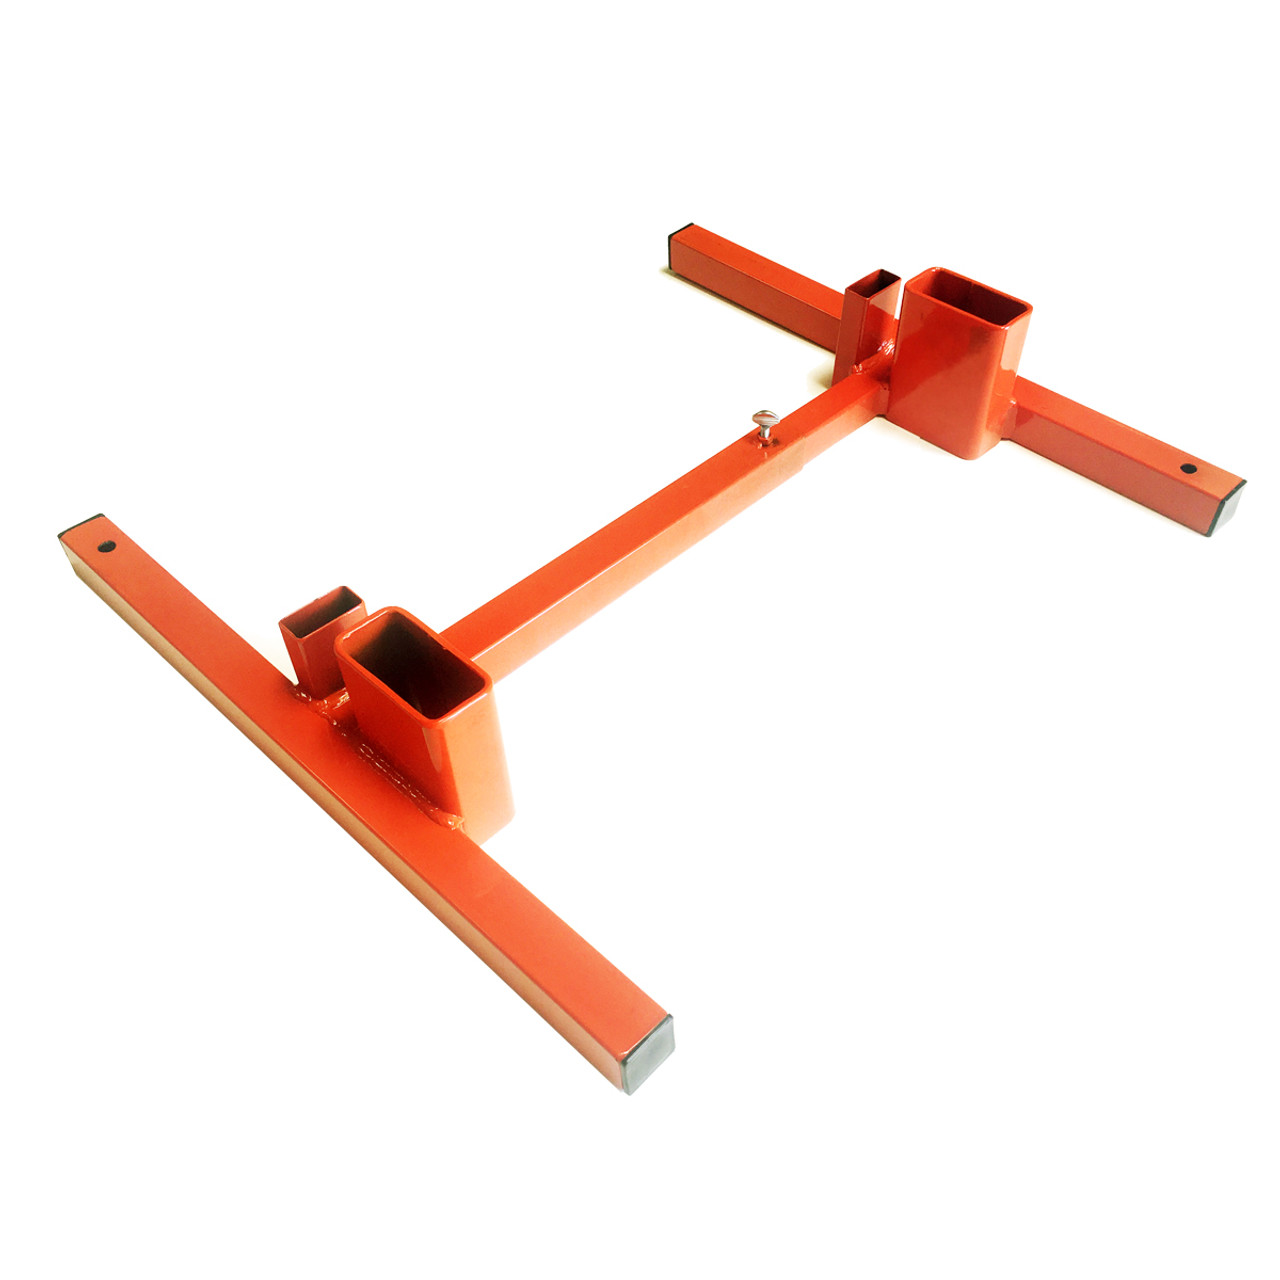 2 in 1 Metal Stand